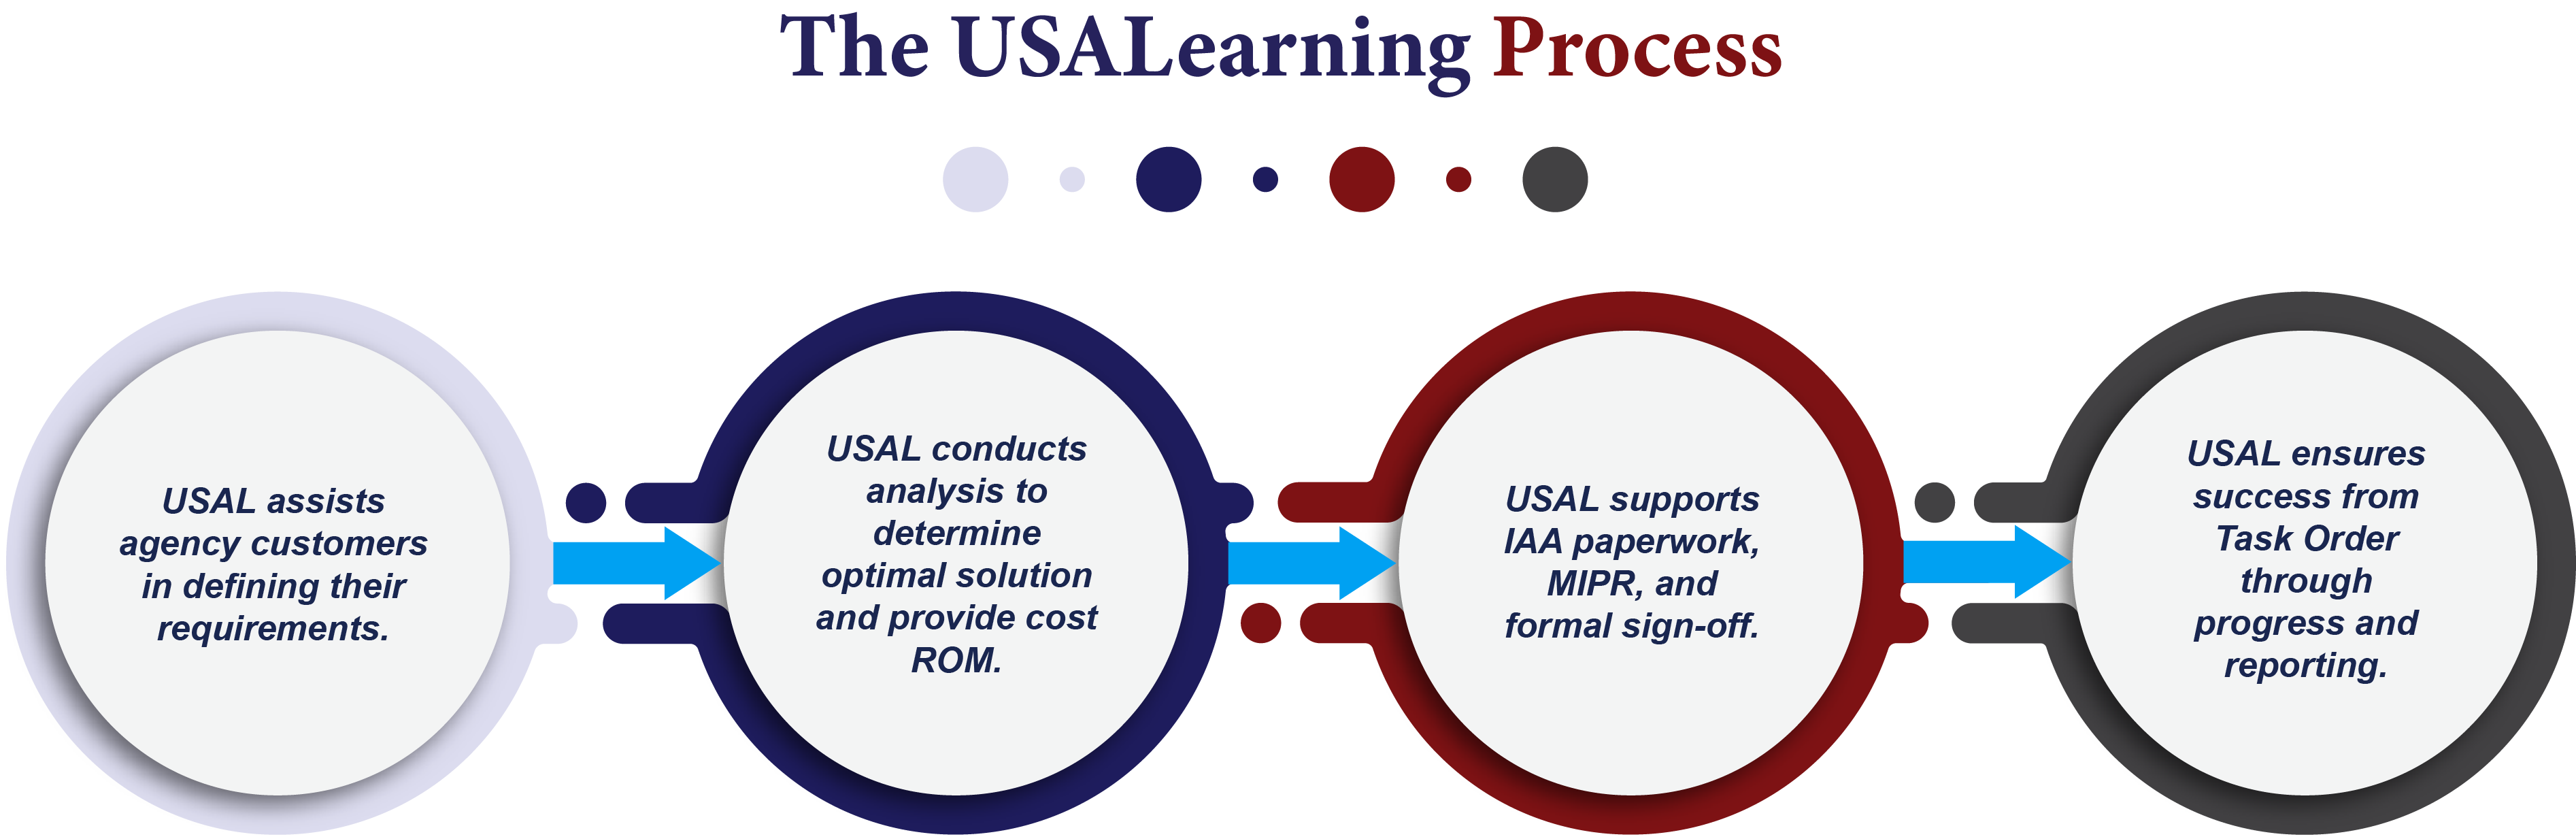 The USALearning Process has 4 steps: defining requirements with clients, conducting analysis to determine the optimal solution and providing a ROM, completing paperwork, and ensuring Task Order progress.